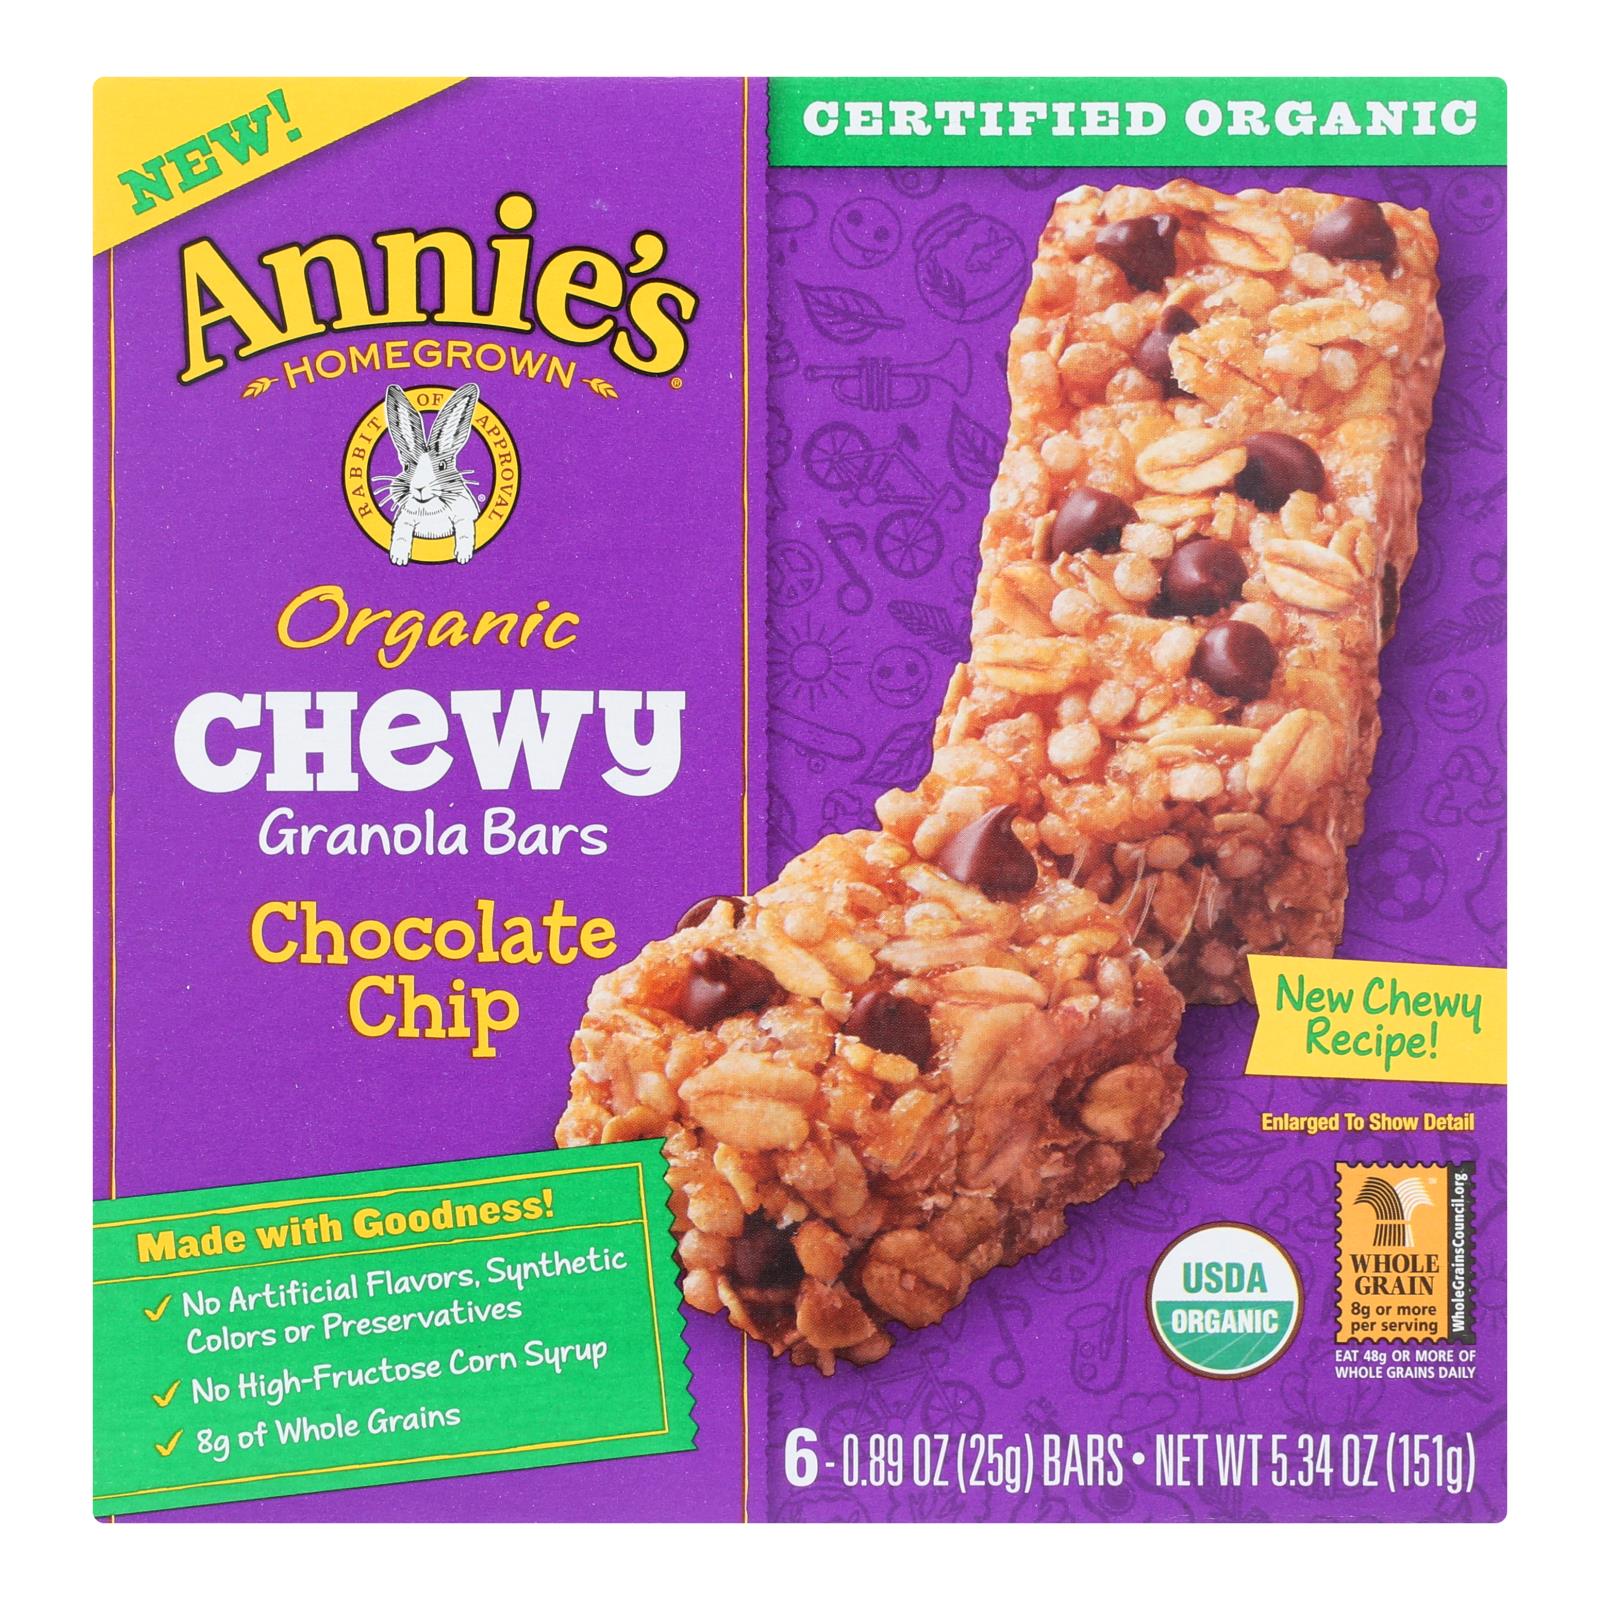 Annie'S Homegrown, Annie's Homegrown Organic Chewy Granola Bars Chocolate Chip - Case of 12 - 5.34 oz. (Pack of 12)